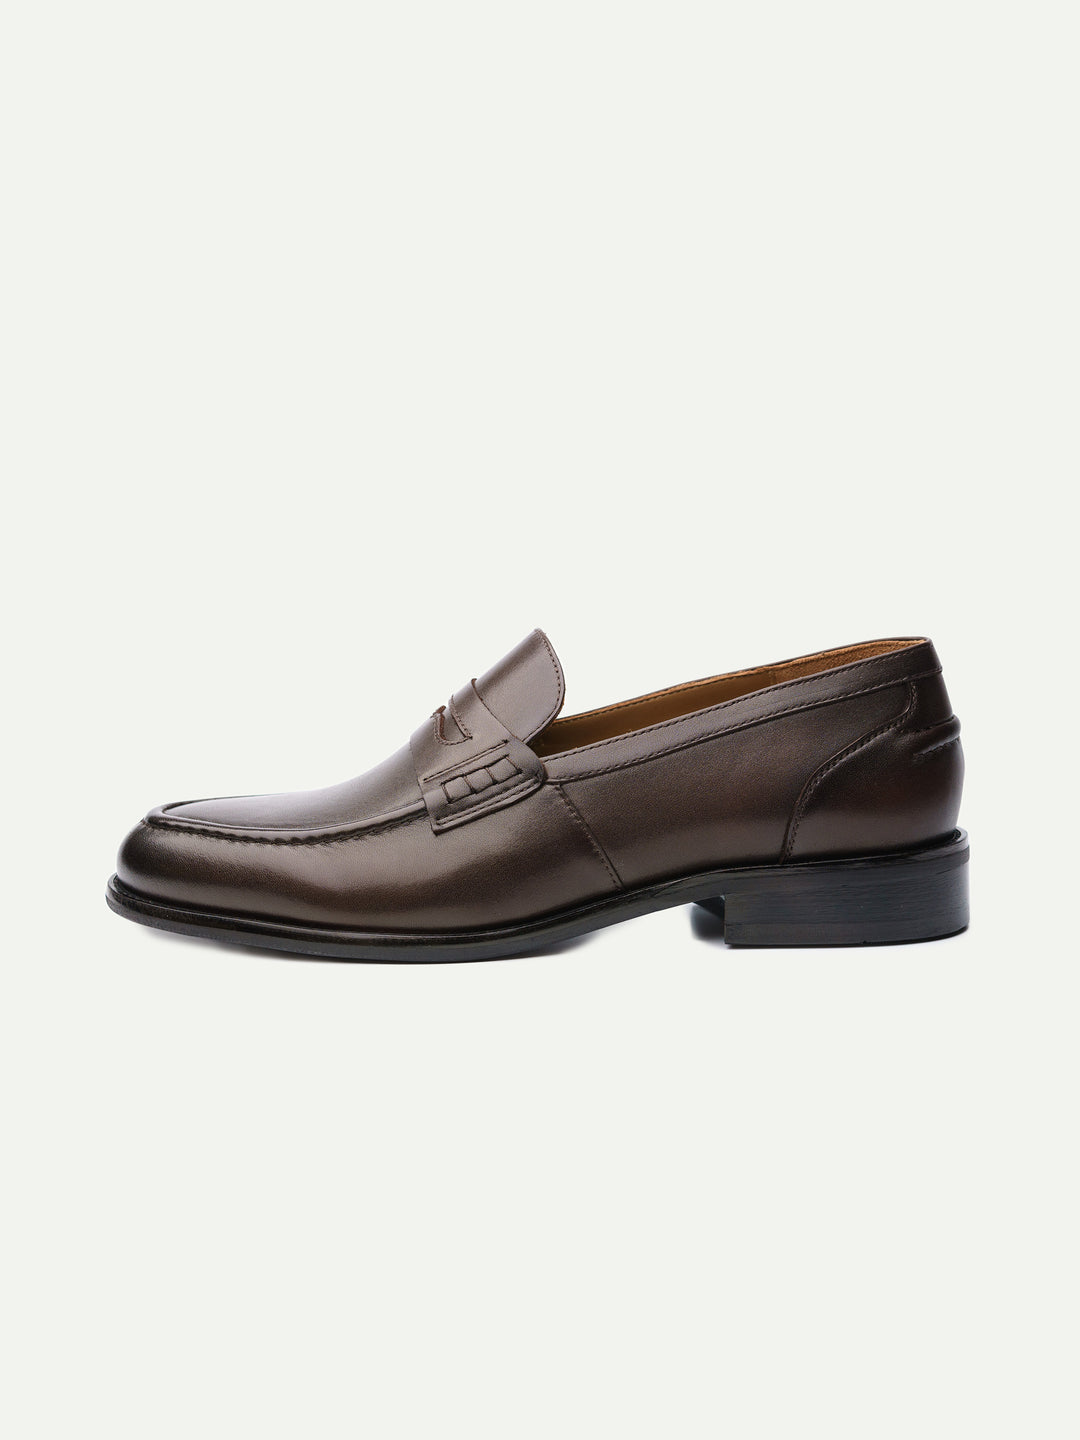 Fabi lew loafers